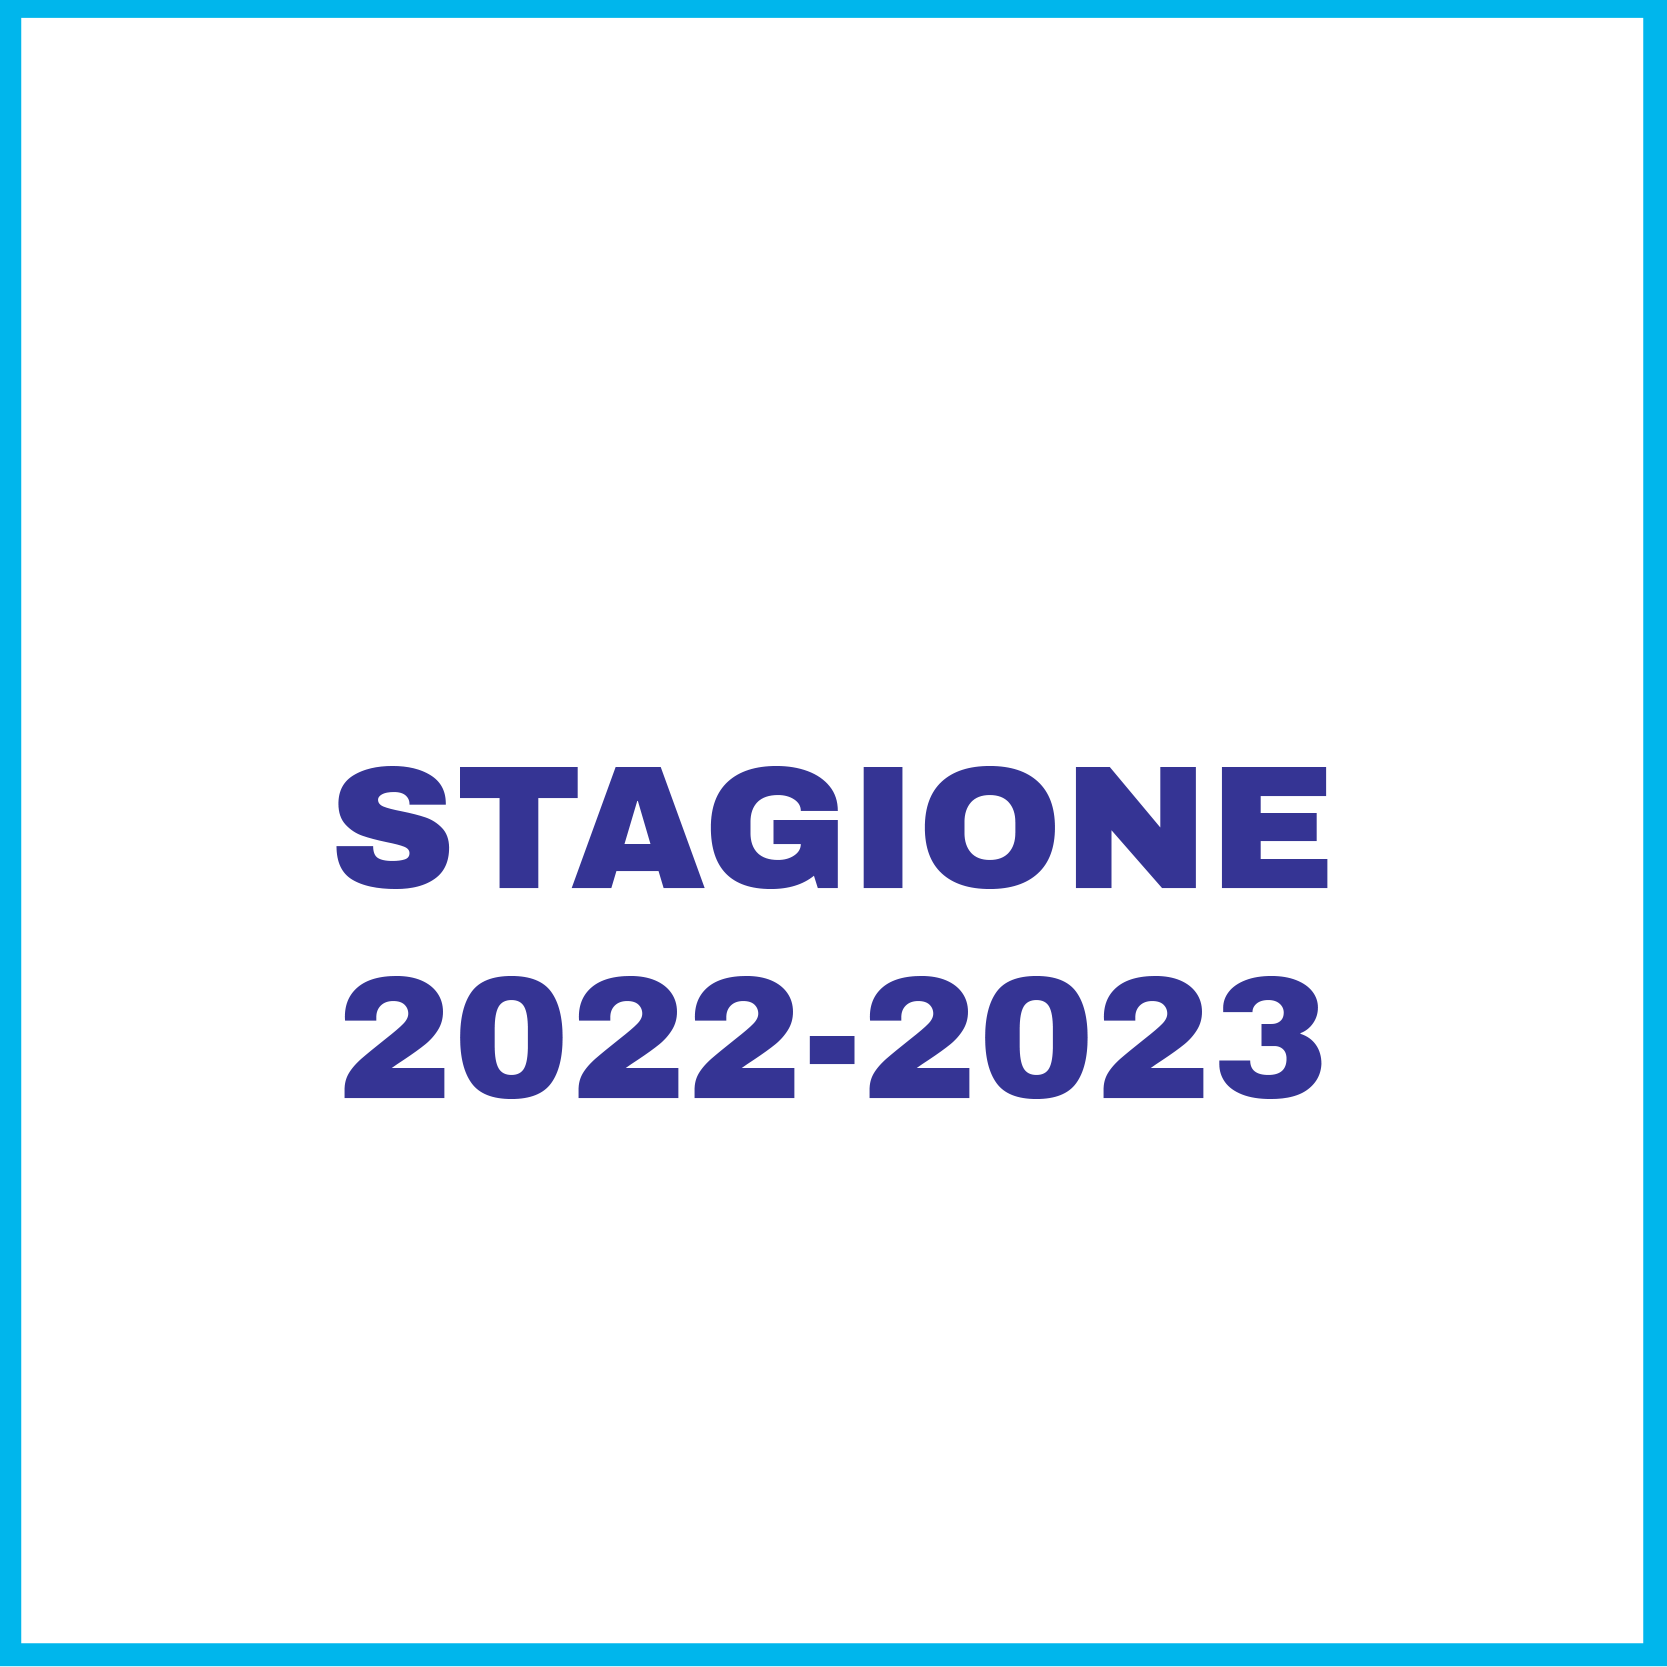 STAGIONE-2022-2023